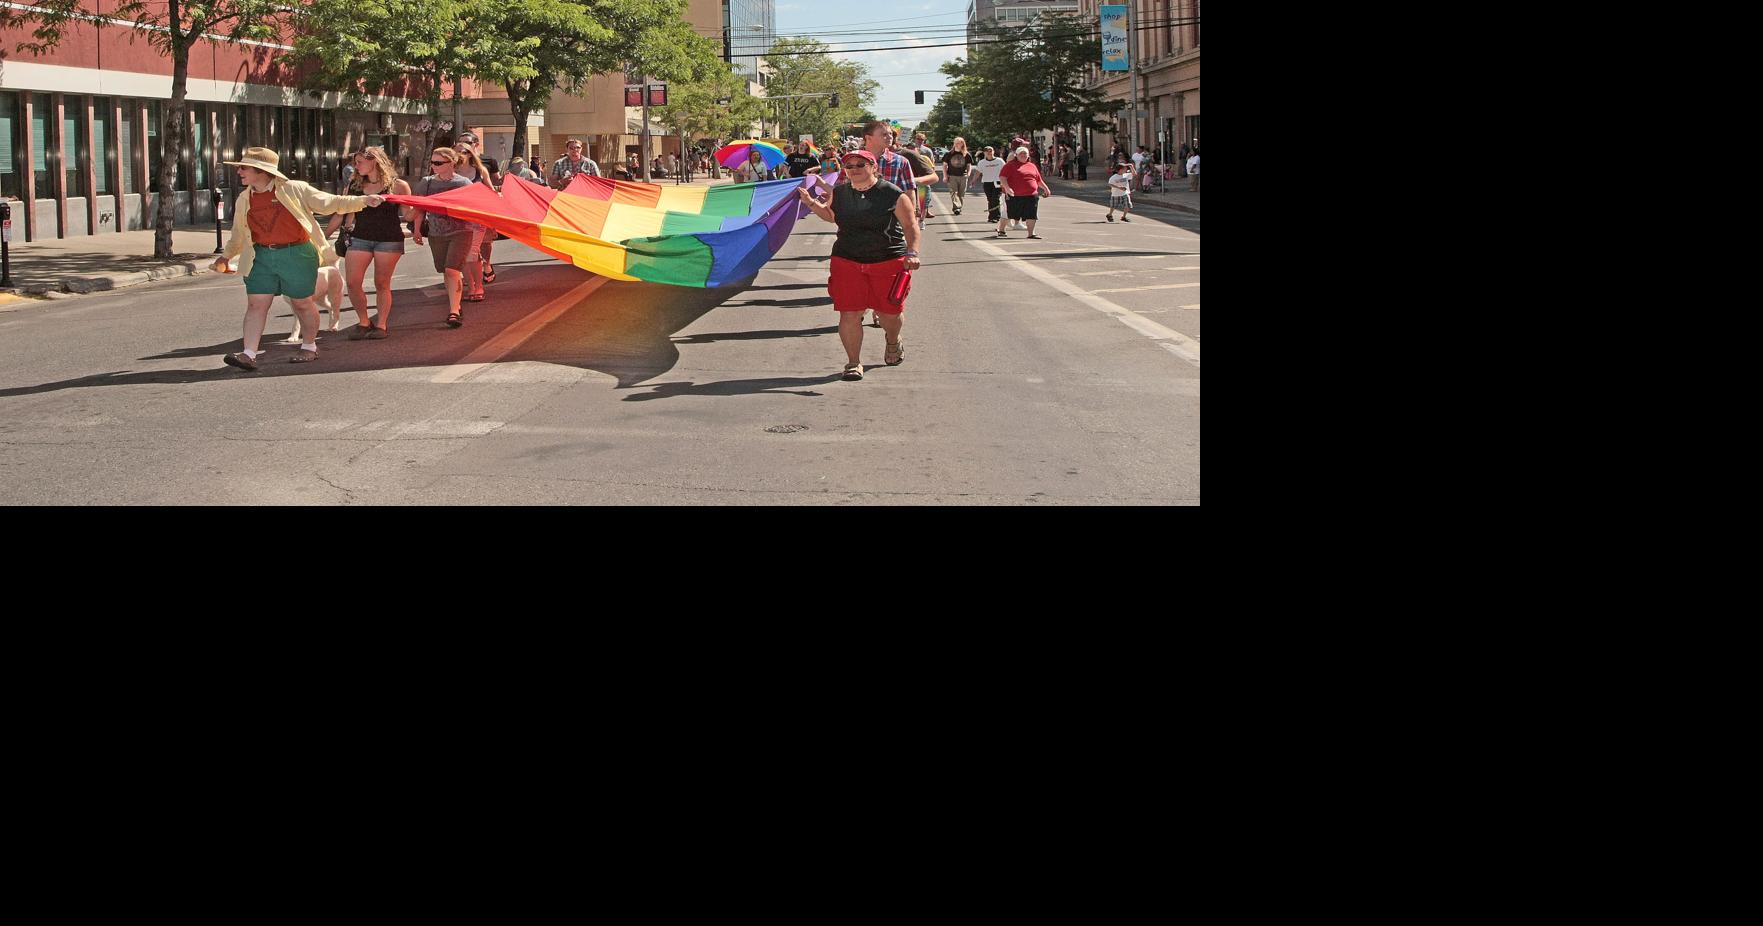 Billings to host gay pride festival for 1st time in 9 years